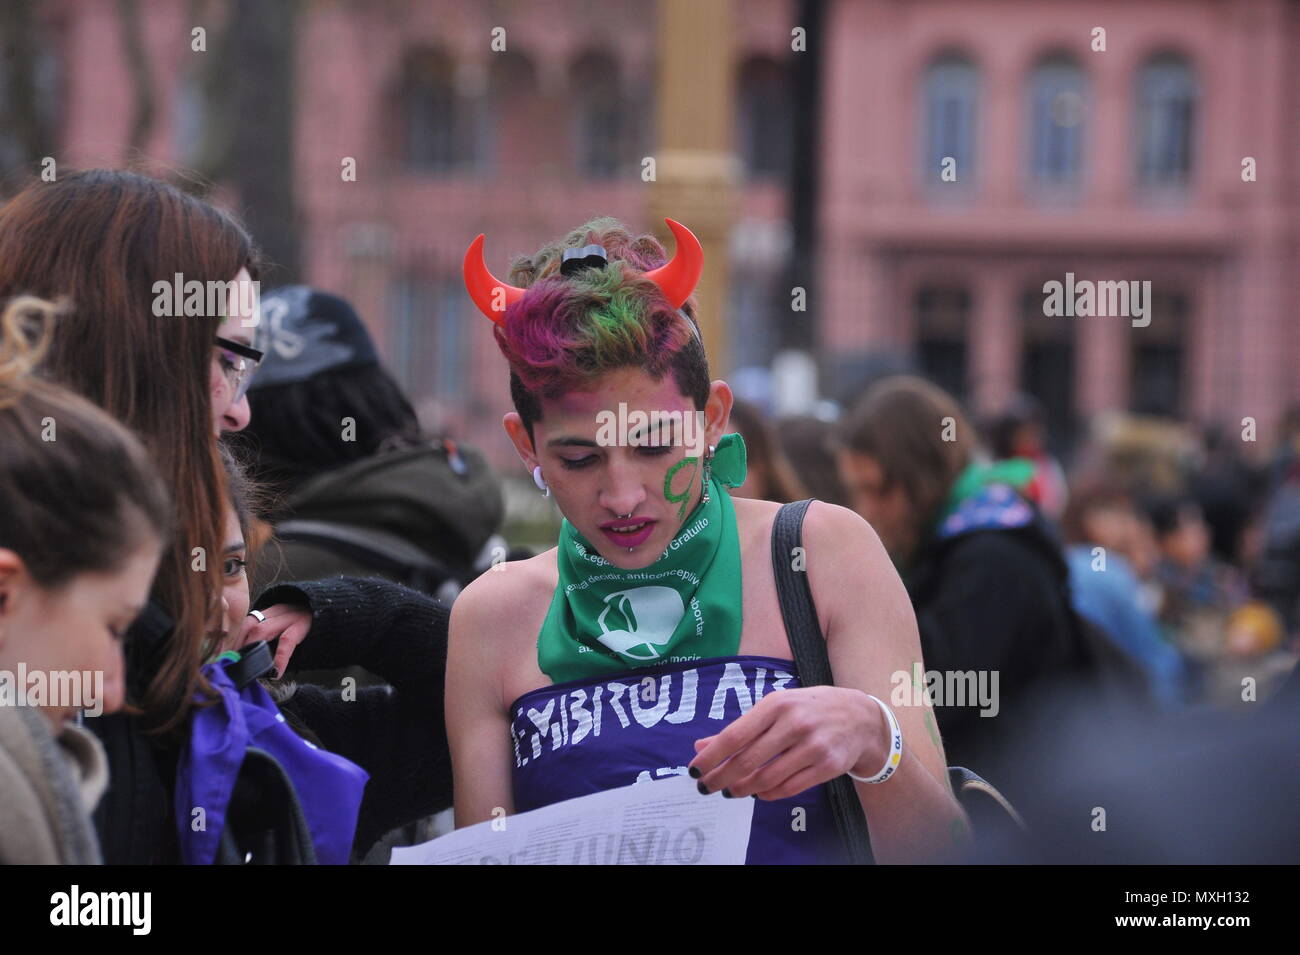 Buenos Aires, Buenos Aires, Argentina. 4th June, 2018. A cross-dressed high school boy rallies against gander violence during the ''Ni una menos'' demonstration. ''Ni una menos'', Spanish for ''Not one woman less'' is an Argentine feminist movement that started in 2015 after the murder of 14 years old Chiara Paez, and is now spread across several Latin American countries, campaigning against gender violence. Credit: Patricio Murphy/ZUMA Wire/Alamy Live News Stock Photo